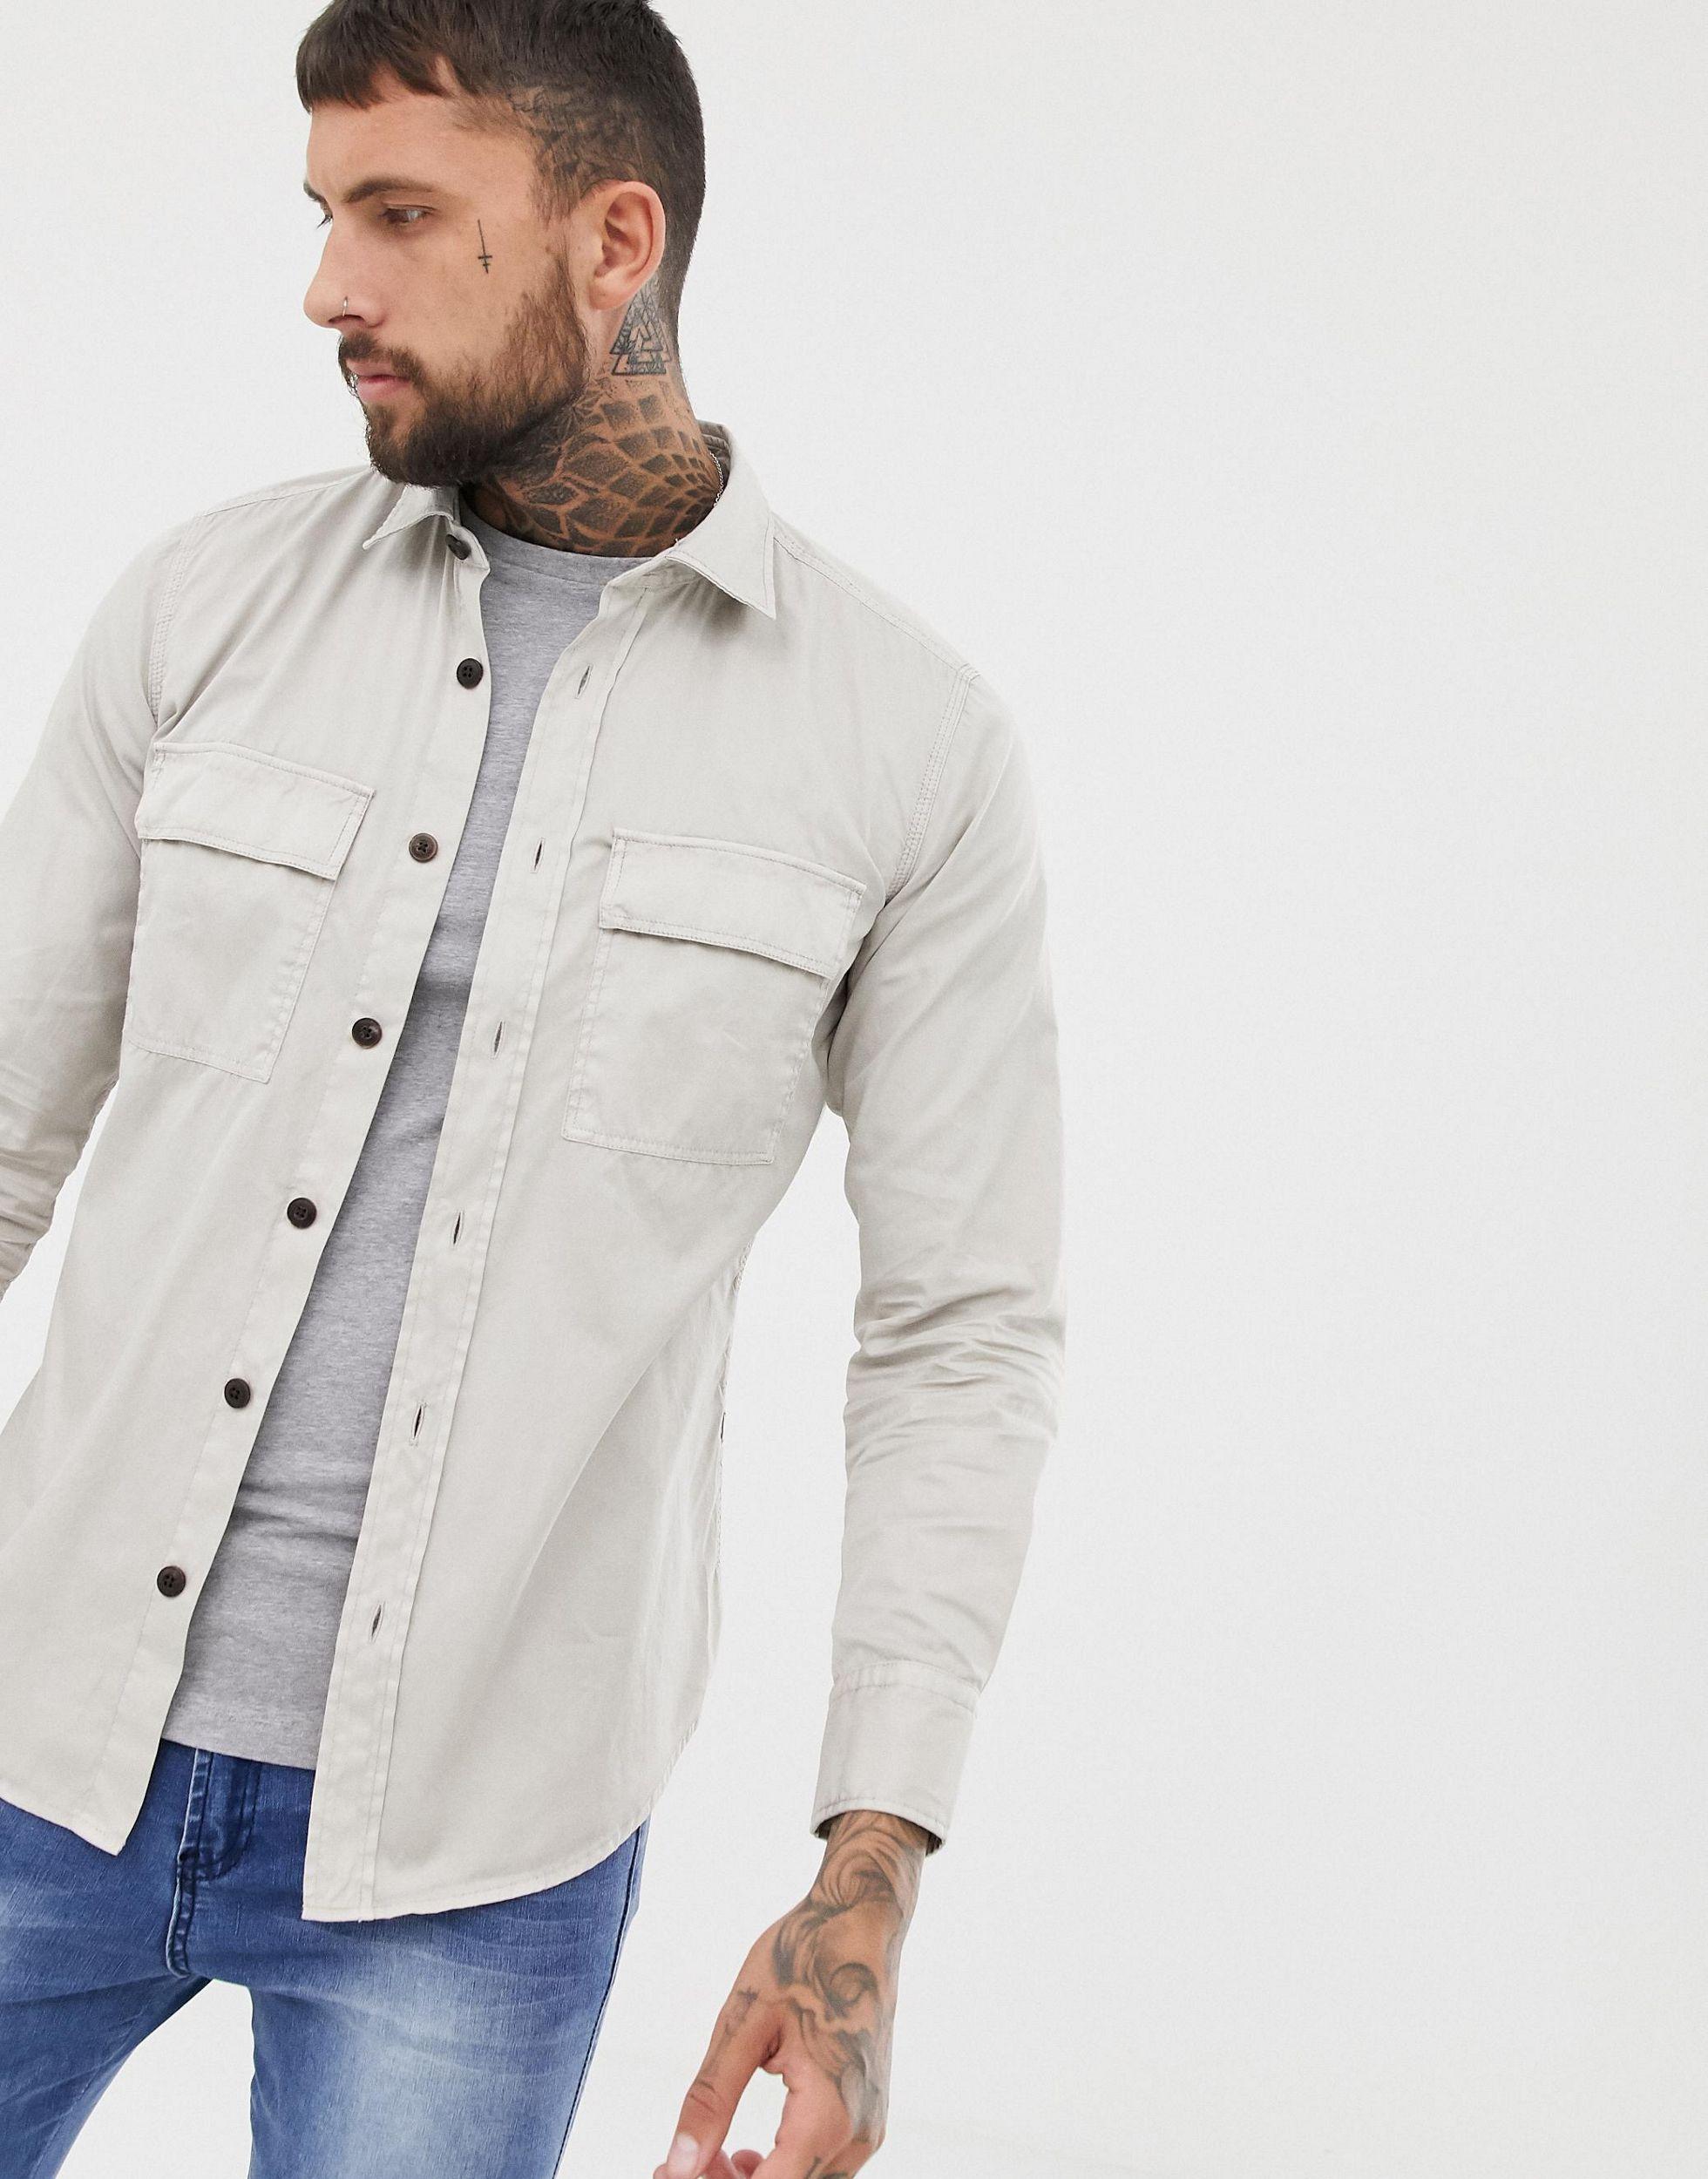 BOSS Cotton Rebus Overshirt in Stone (Gray) for Men - Lyst